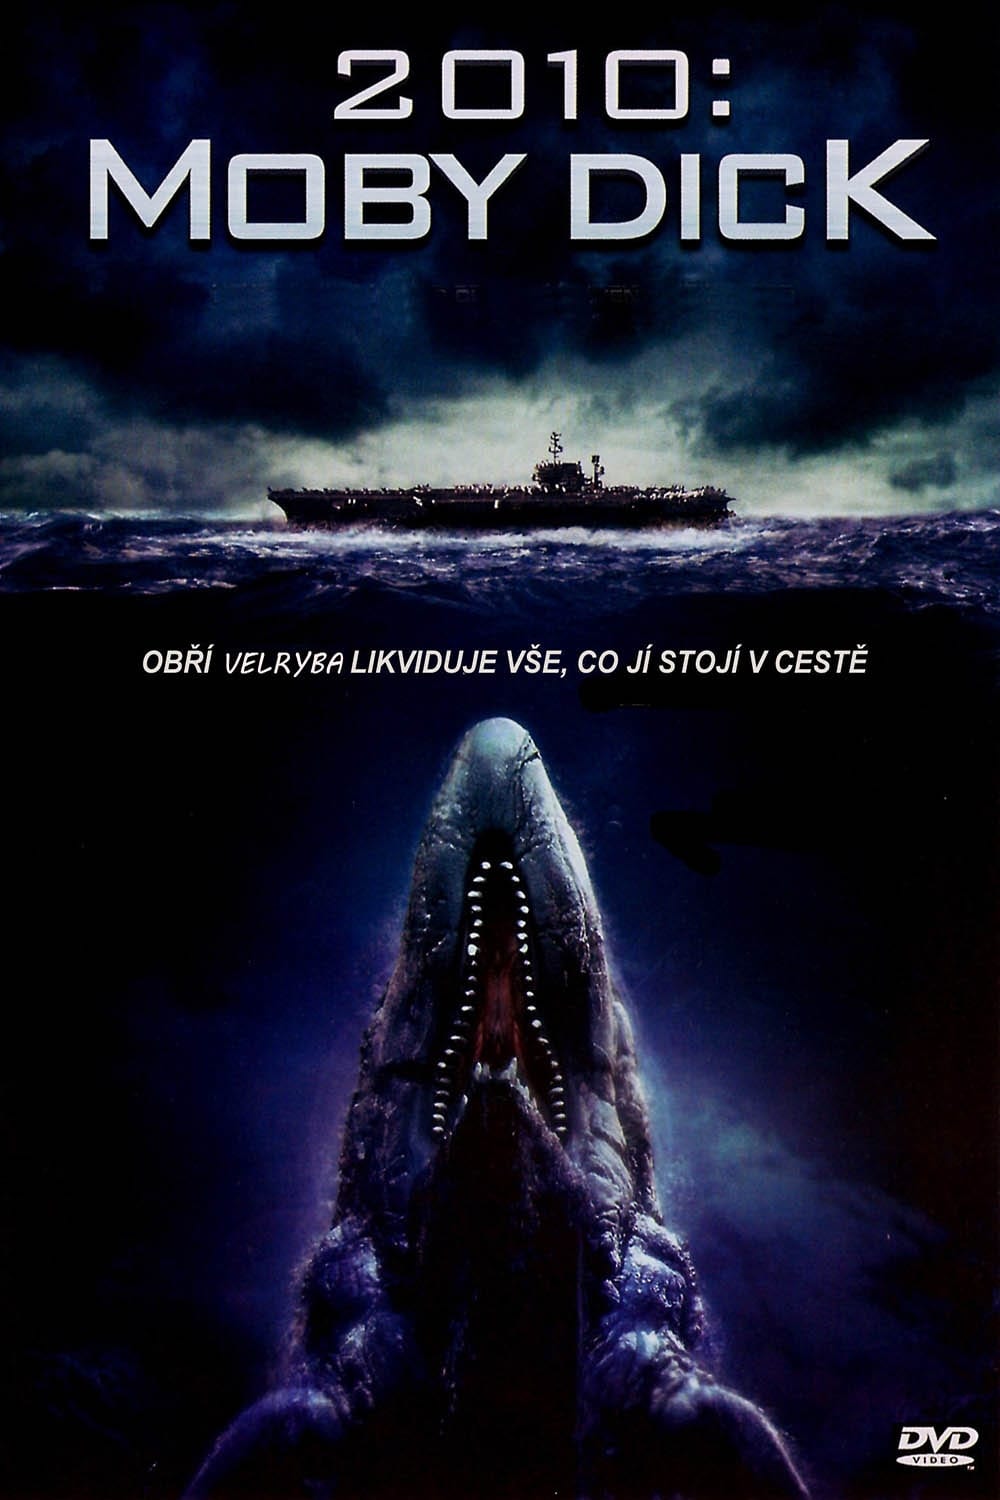 Moby dick movie free